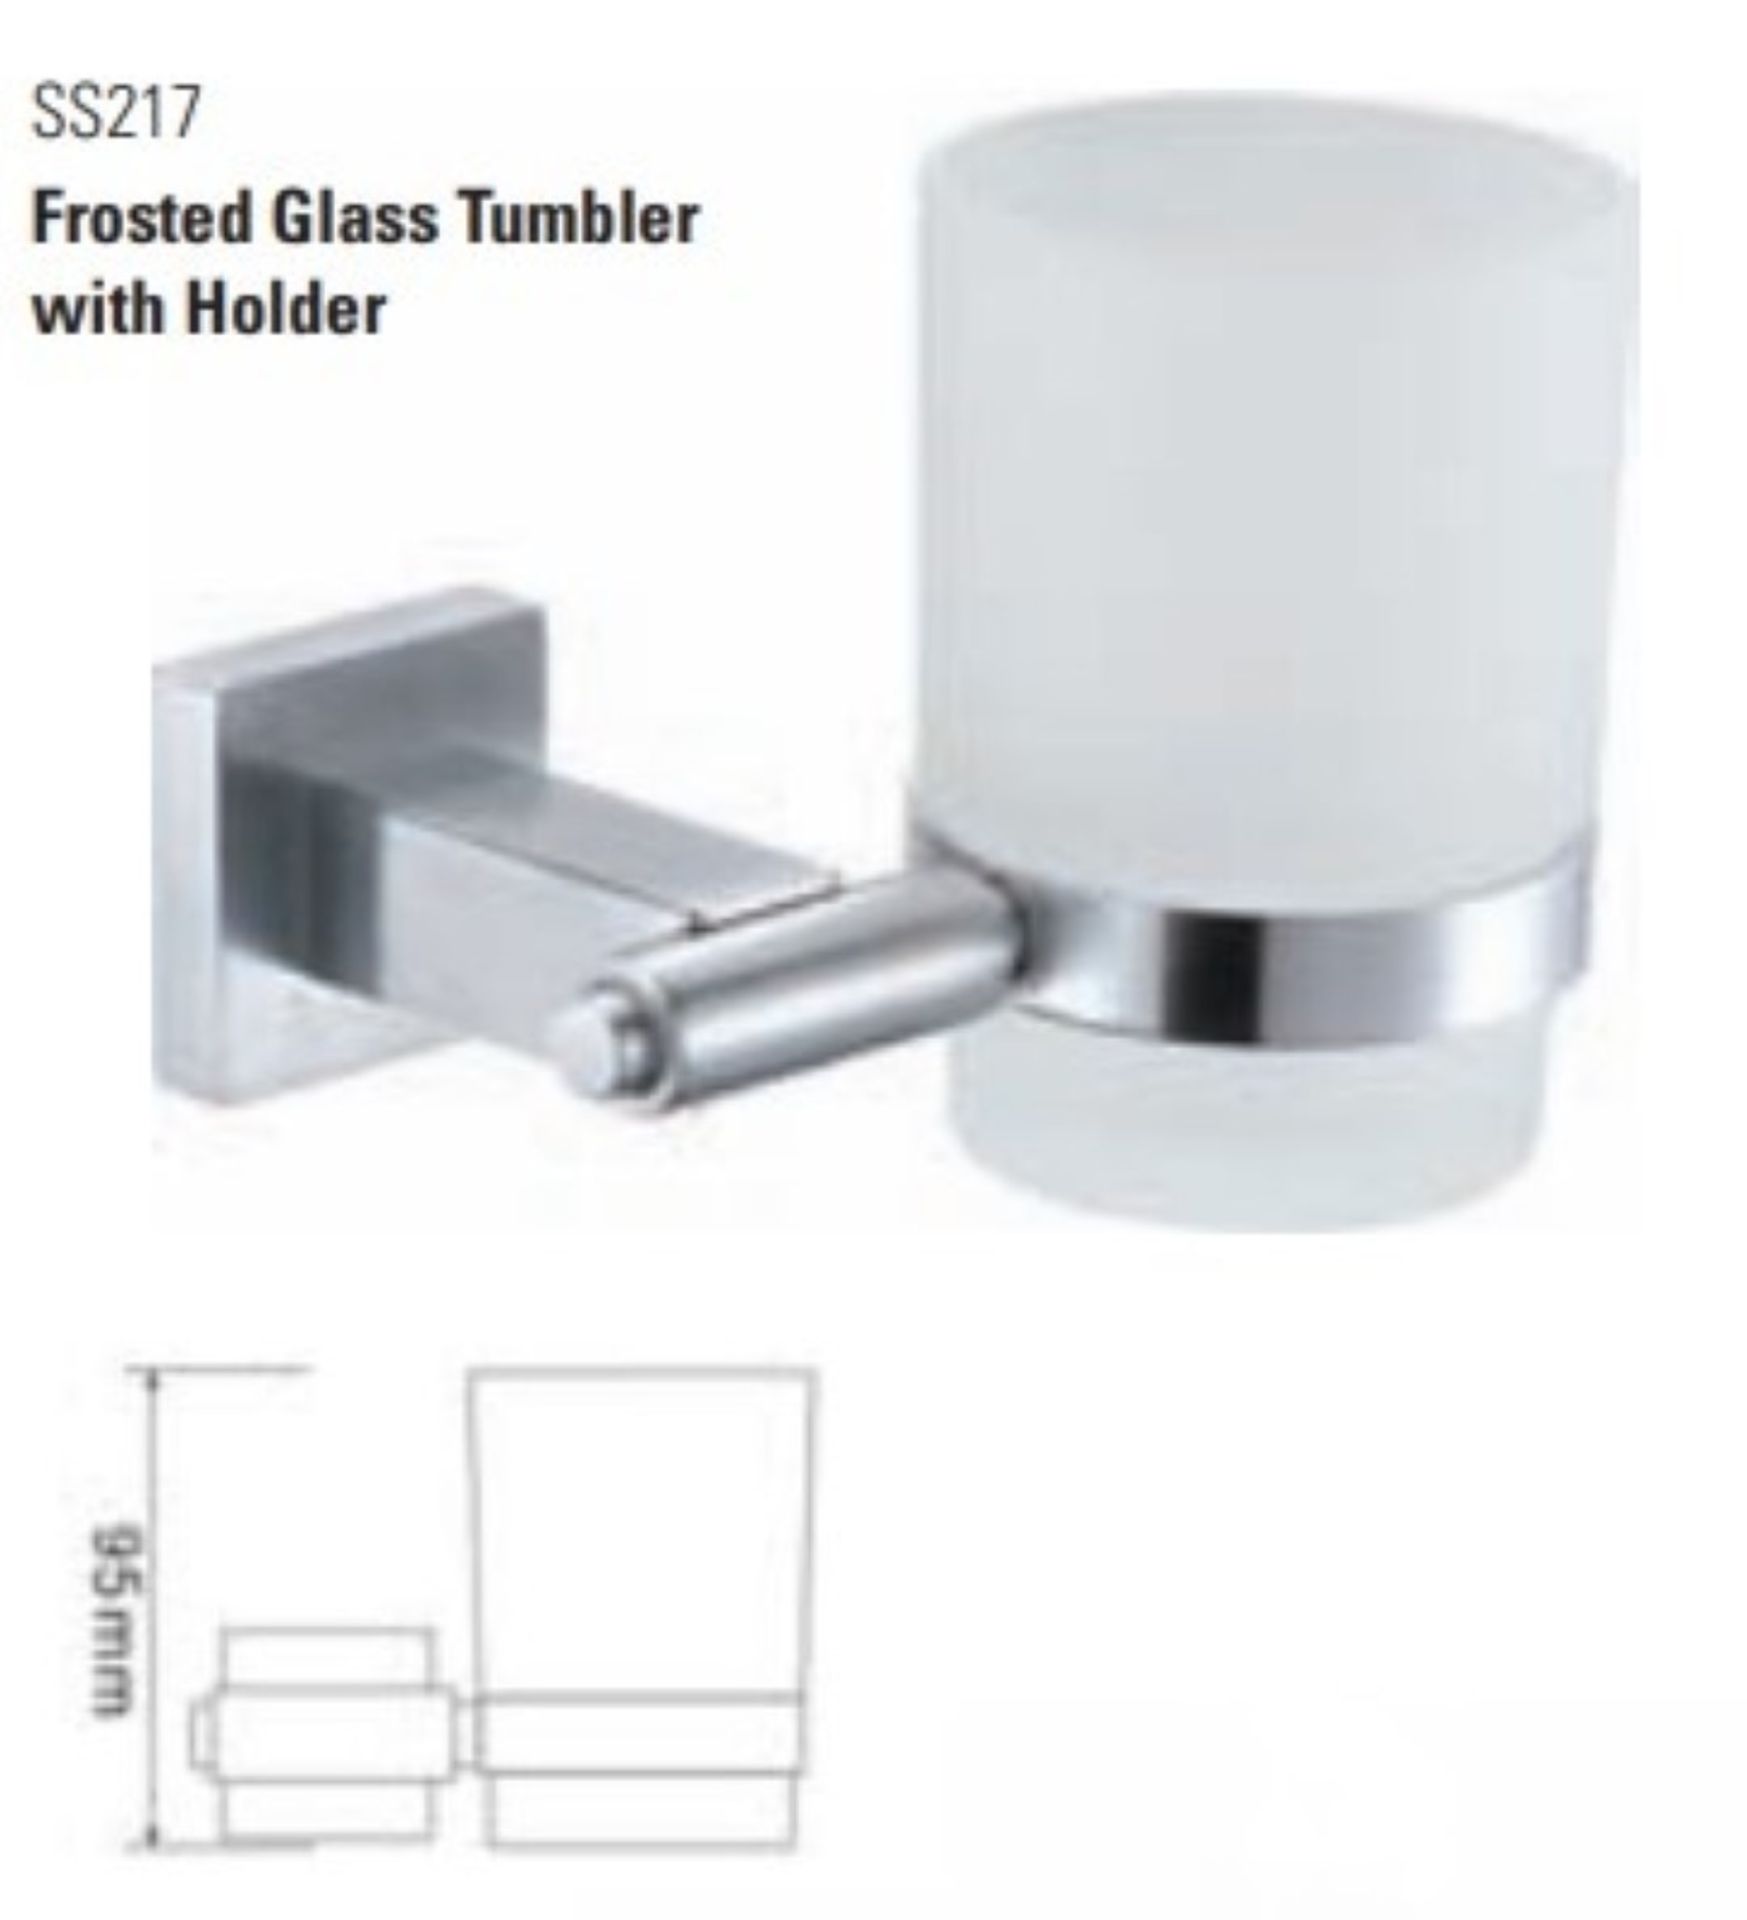 1 x Stonearth Frosted Glass Tumbler With Holder - Solid Stainless Steel Bathroom Accessory - New - Image 2 of 3